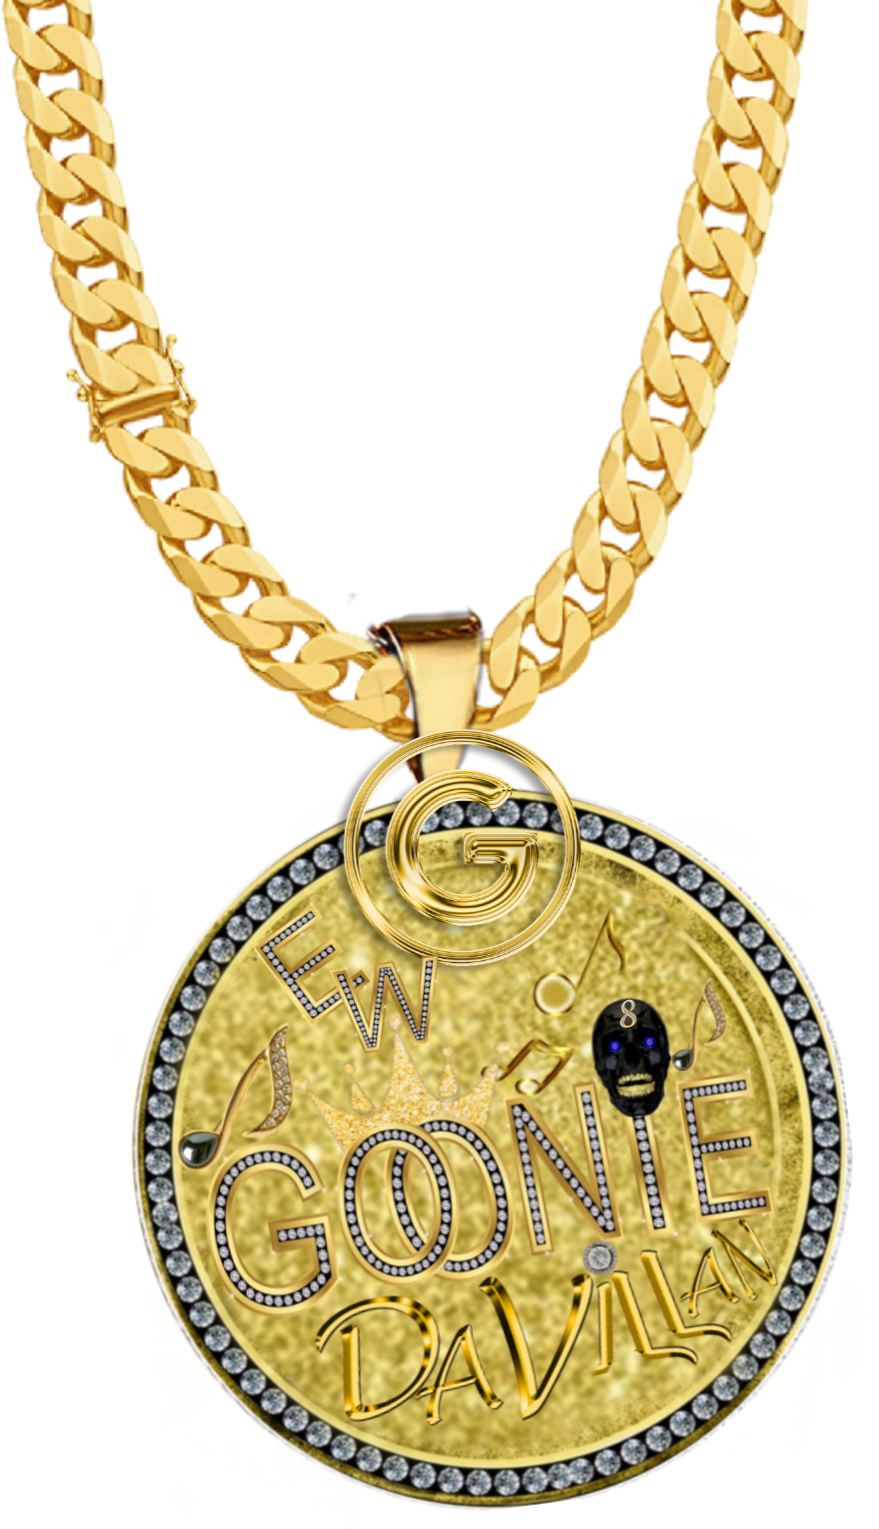 A Gold Chain With A Medallion